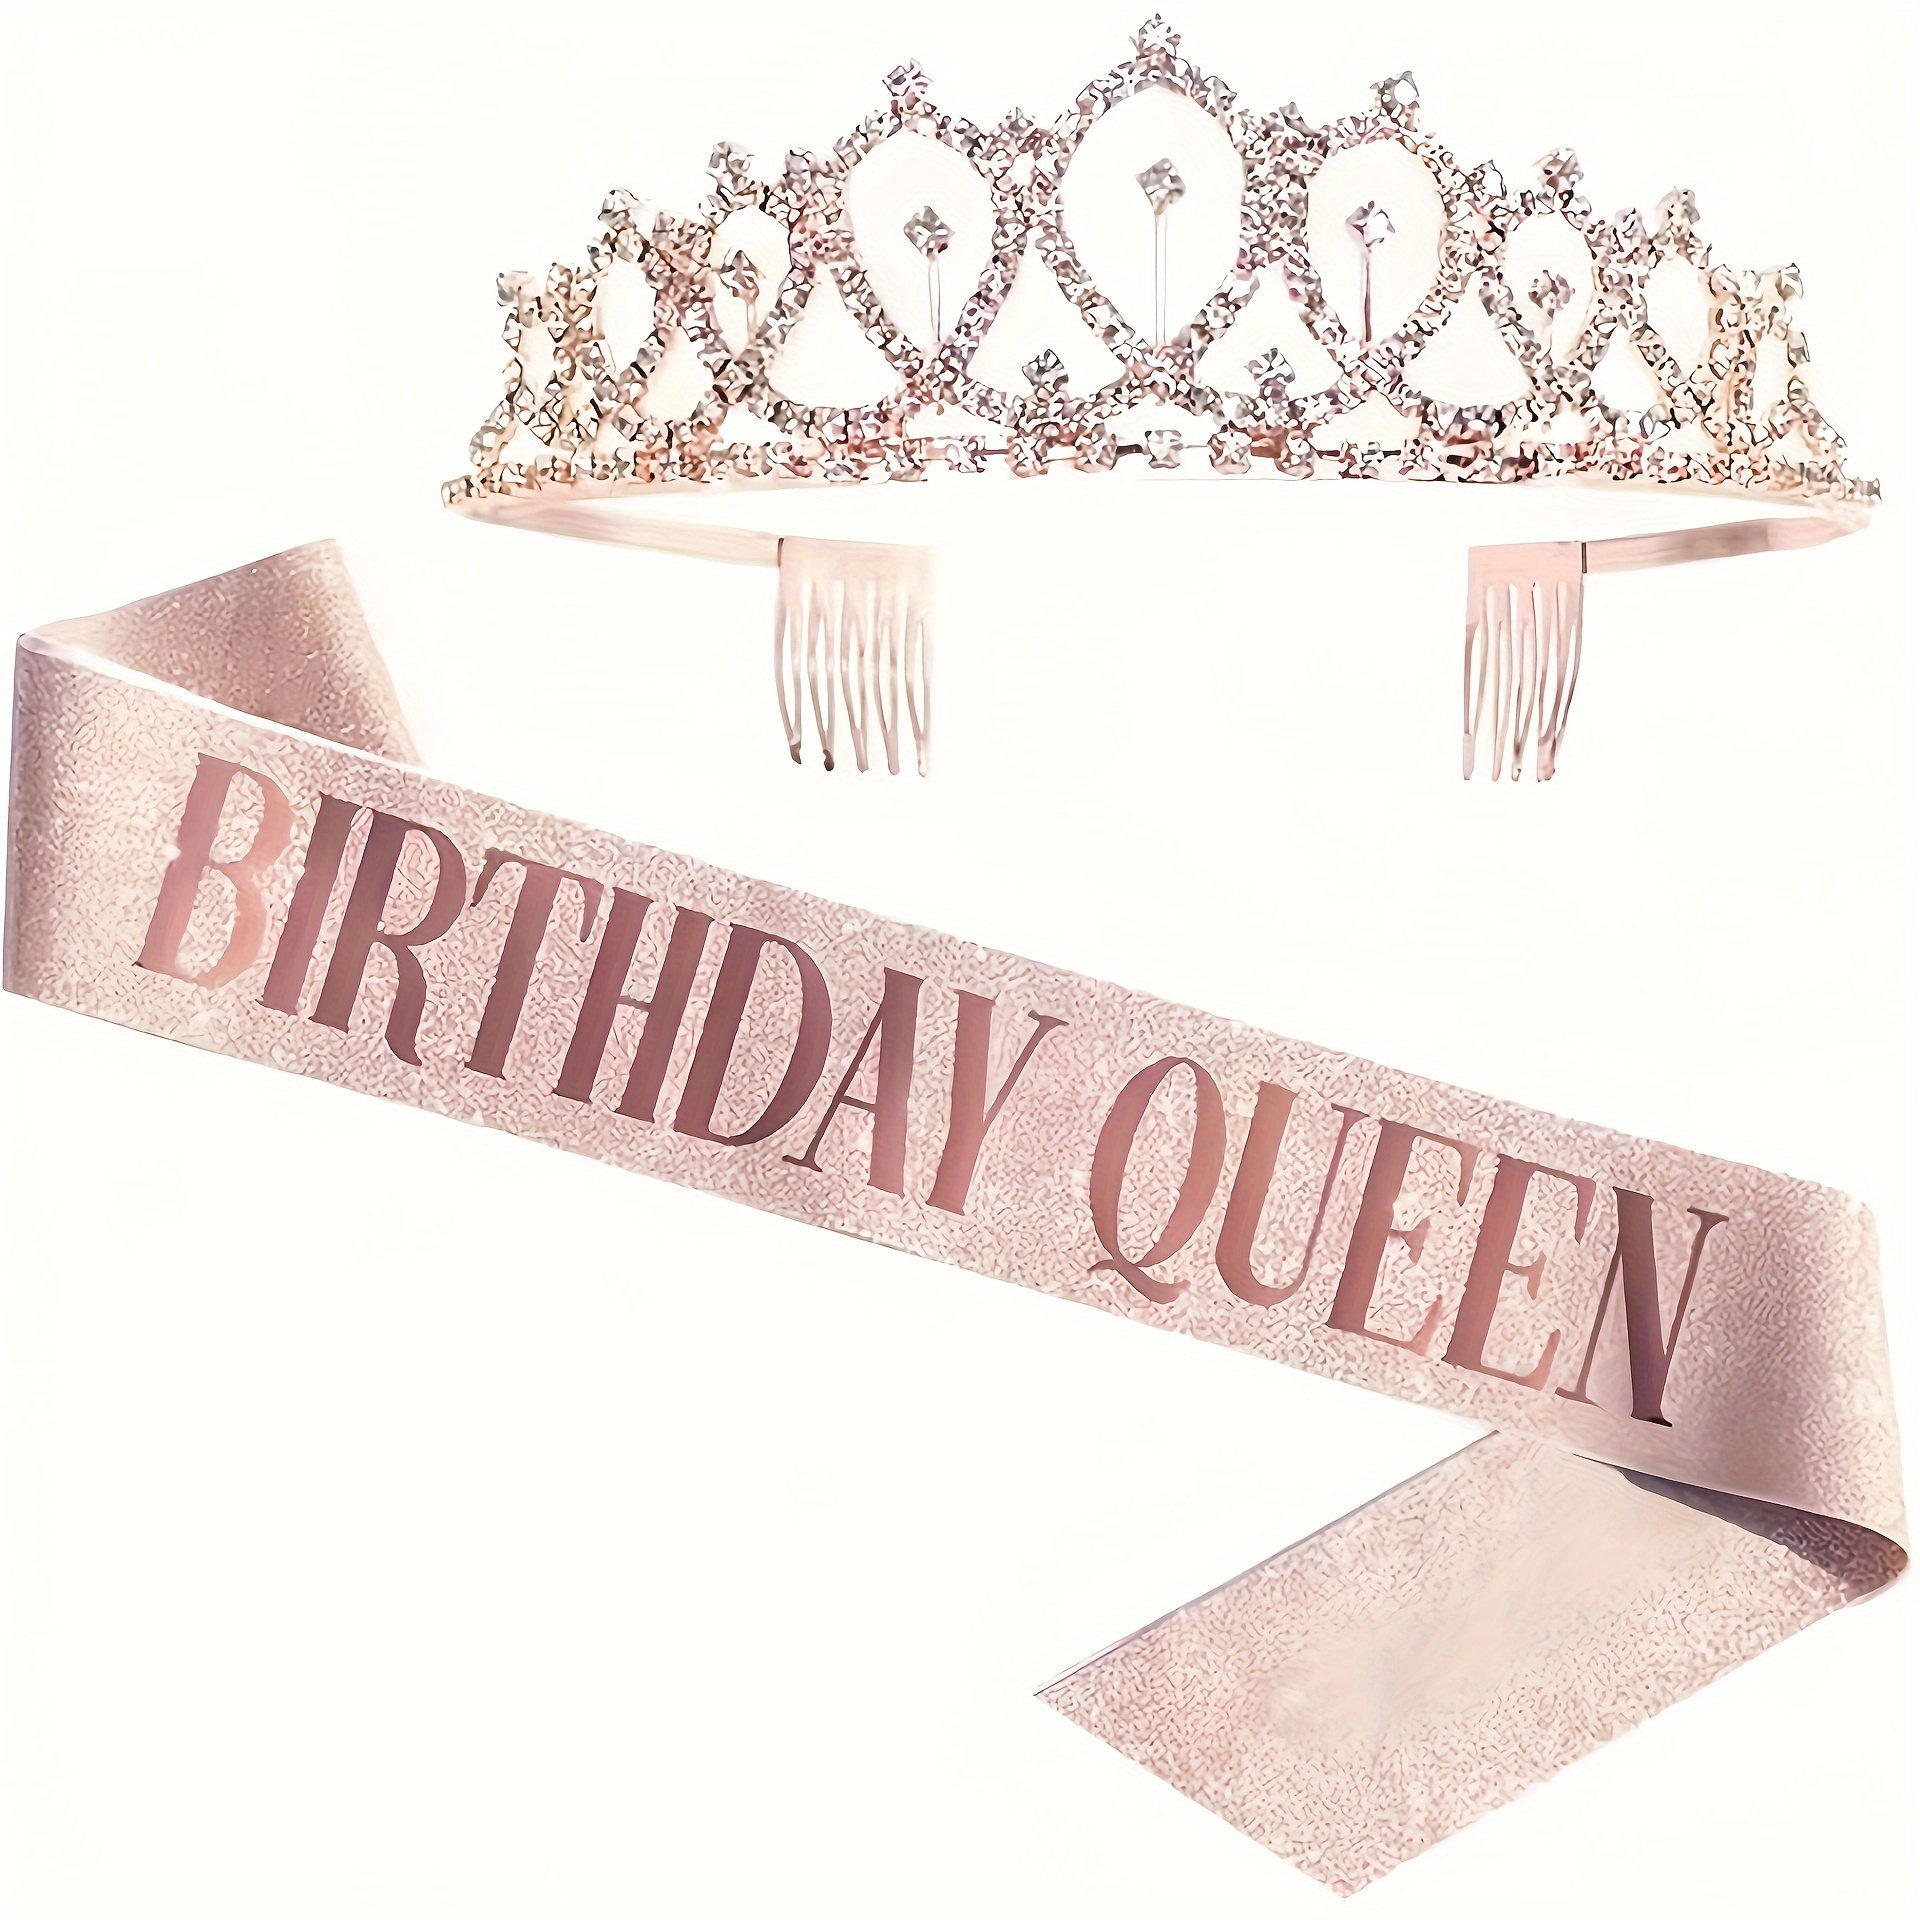 

Birthday Queen Crown Set With Shoulder Strap - Alloy Party & Holiday Supplies For Ages 14+